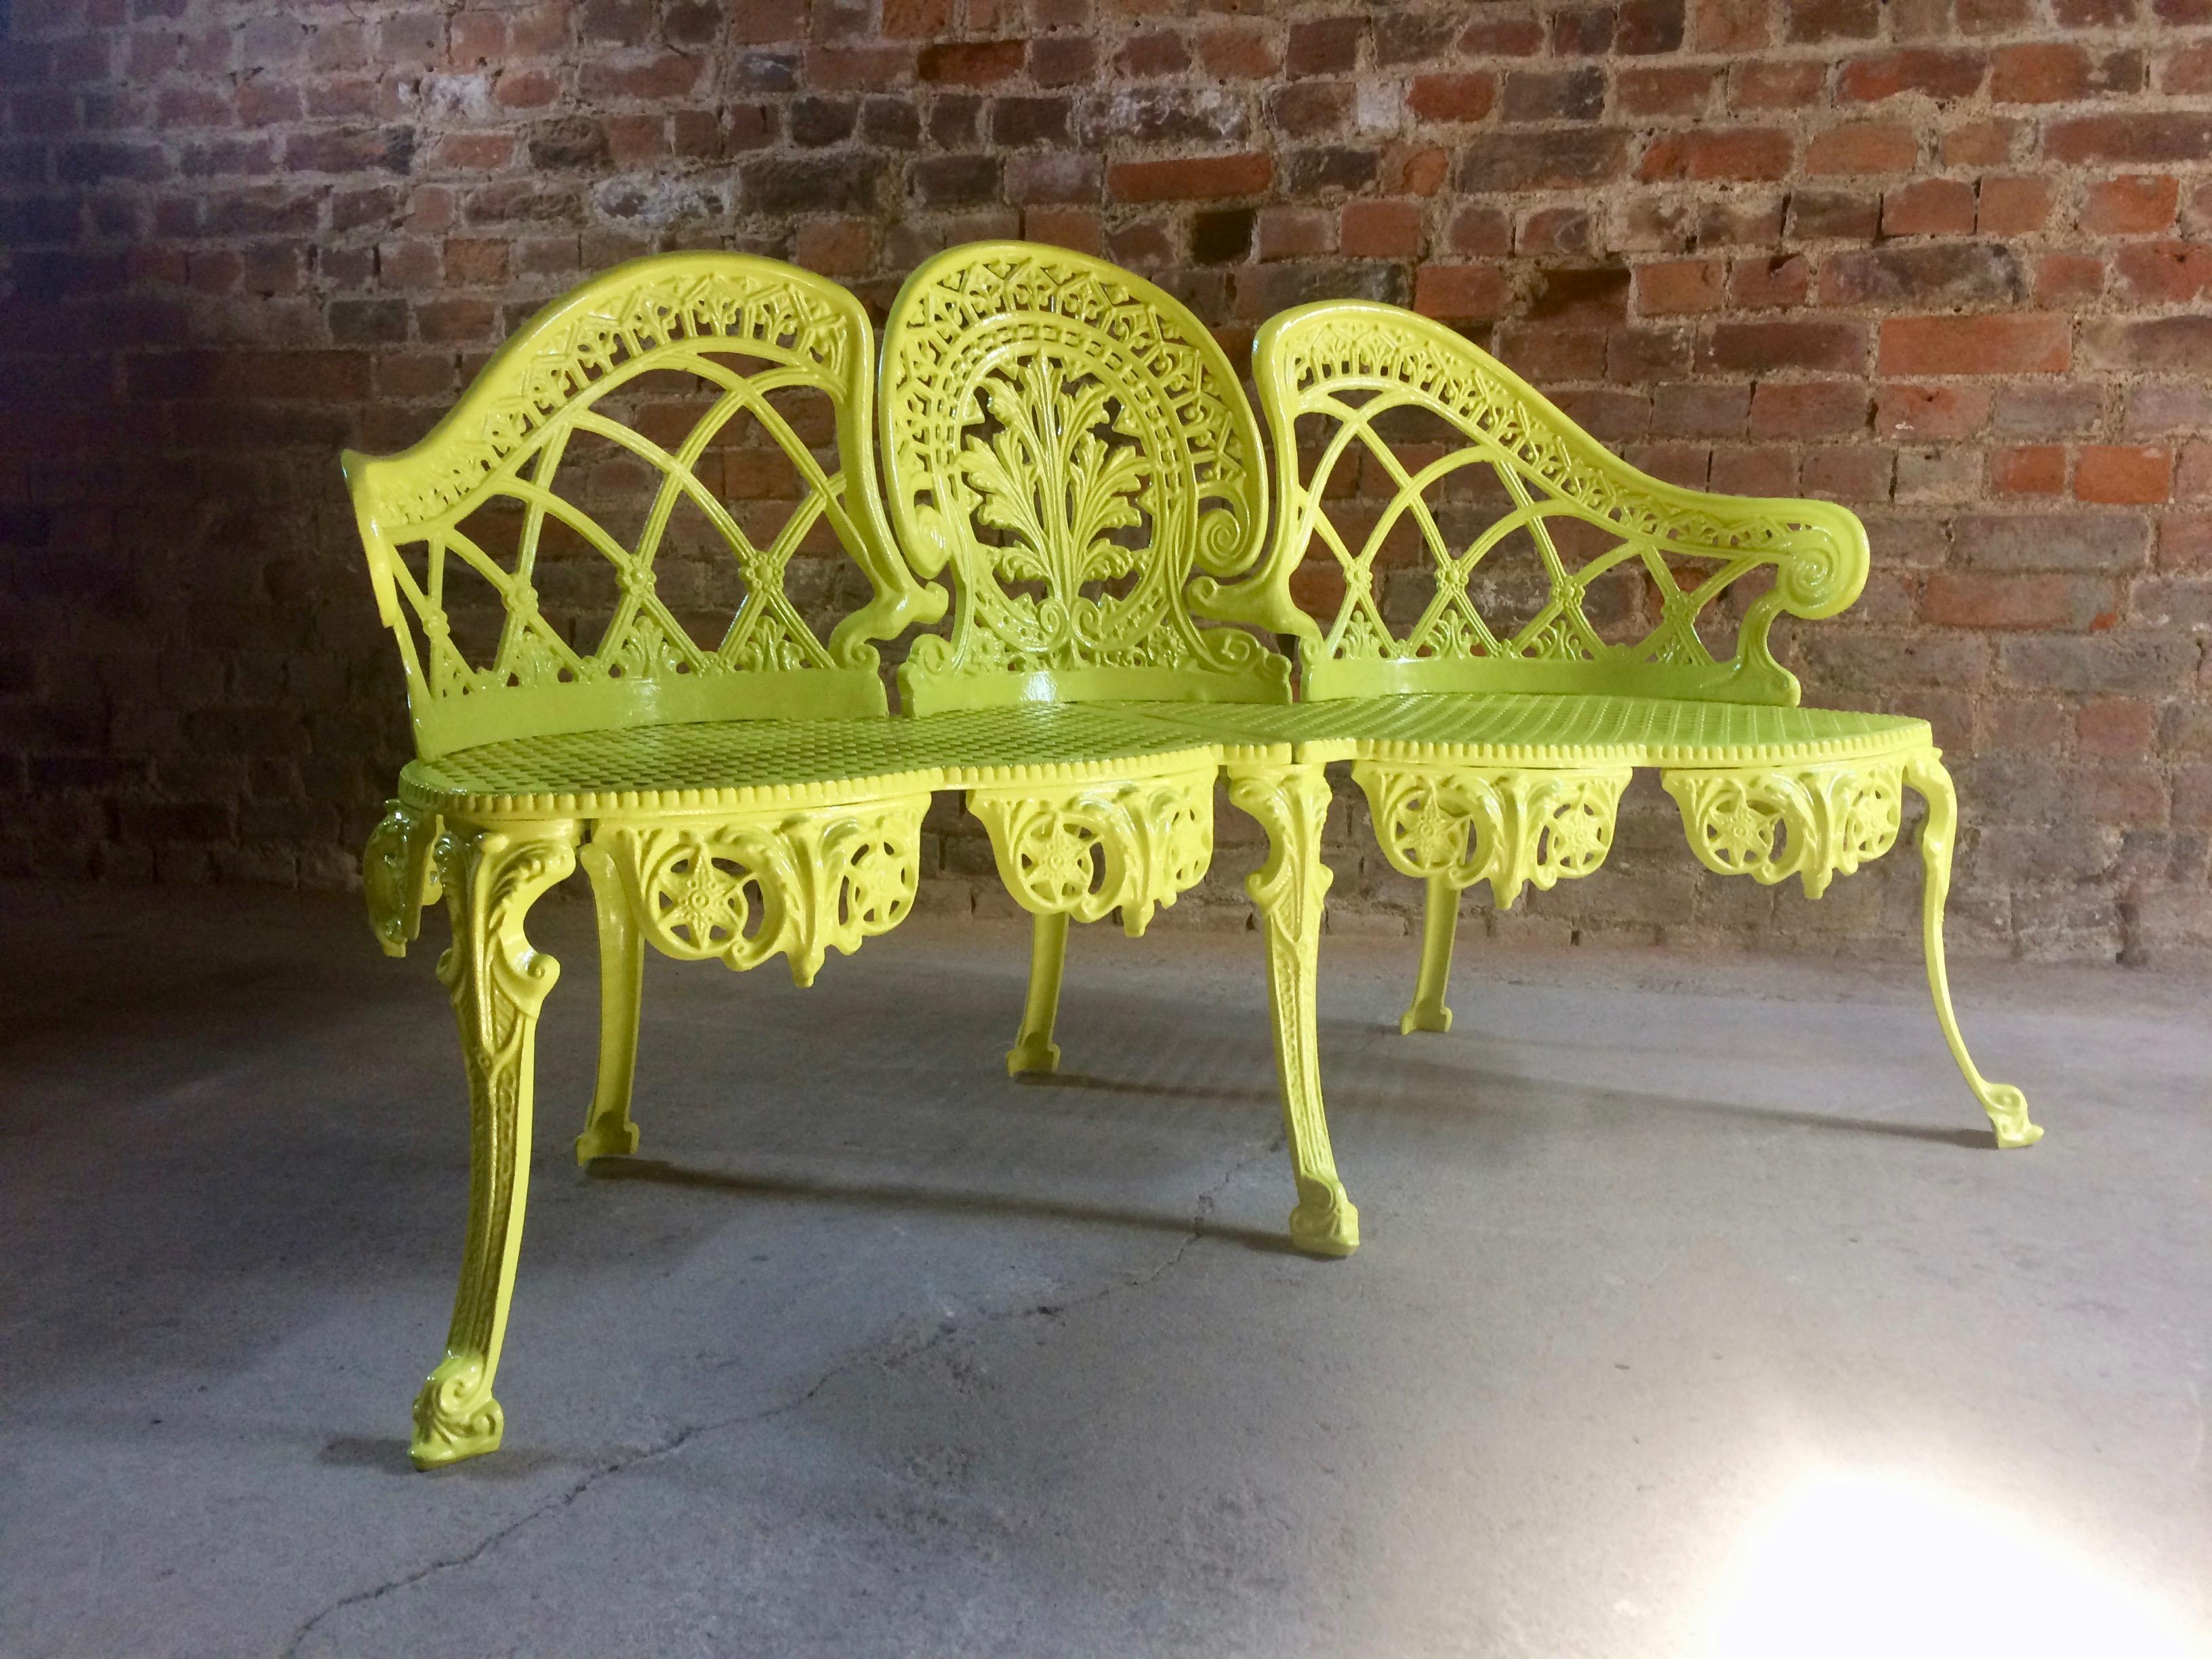 A fabulous original vintage French cast iron garden bench in the Victorian manner circa 1960s, finished in Yellow having been newly shot blasted and powder coated, looks stunning.

French
Victorian style
Metal
Garden bench
1060s
Newly powder